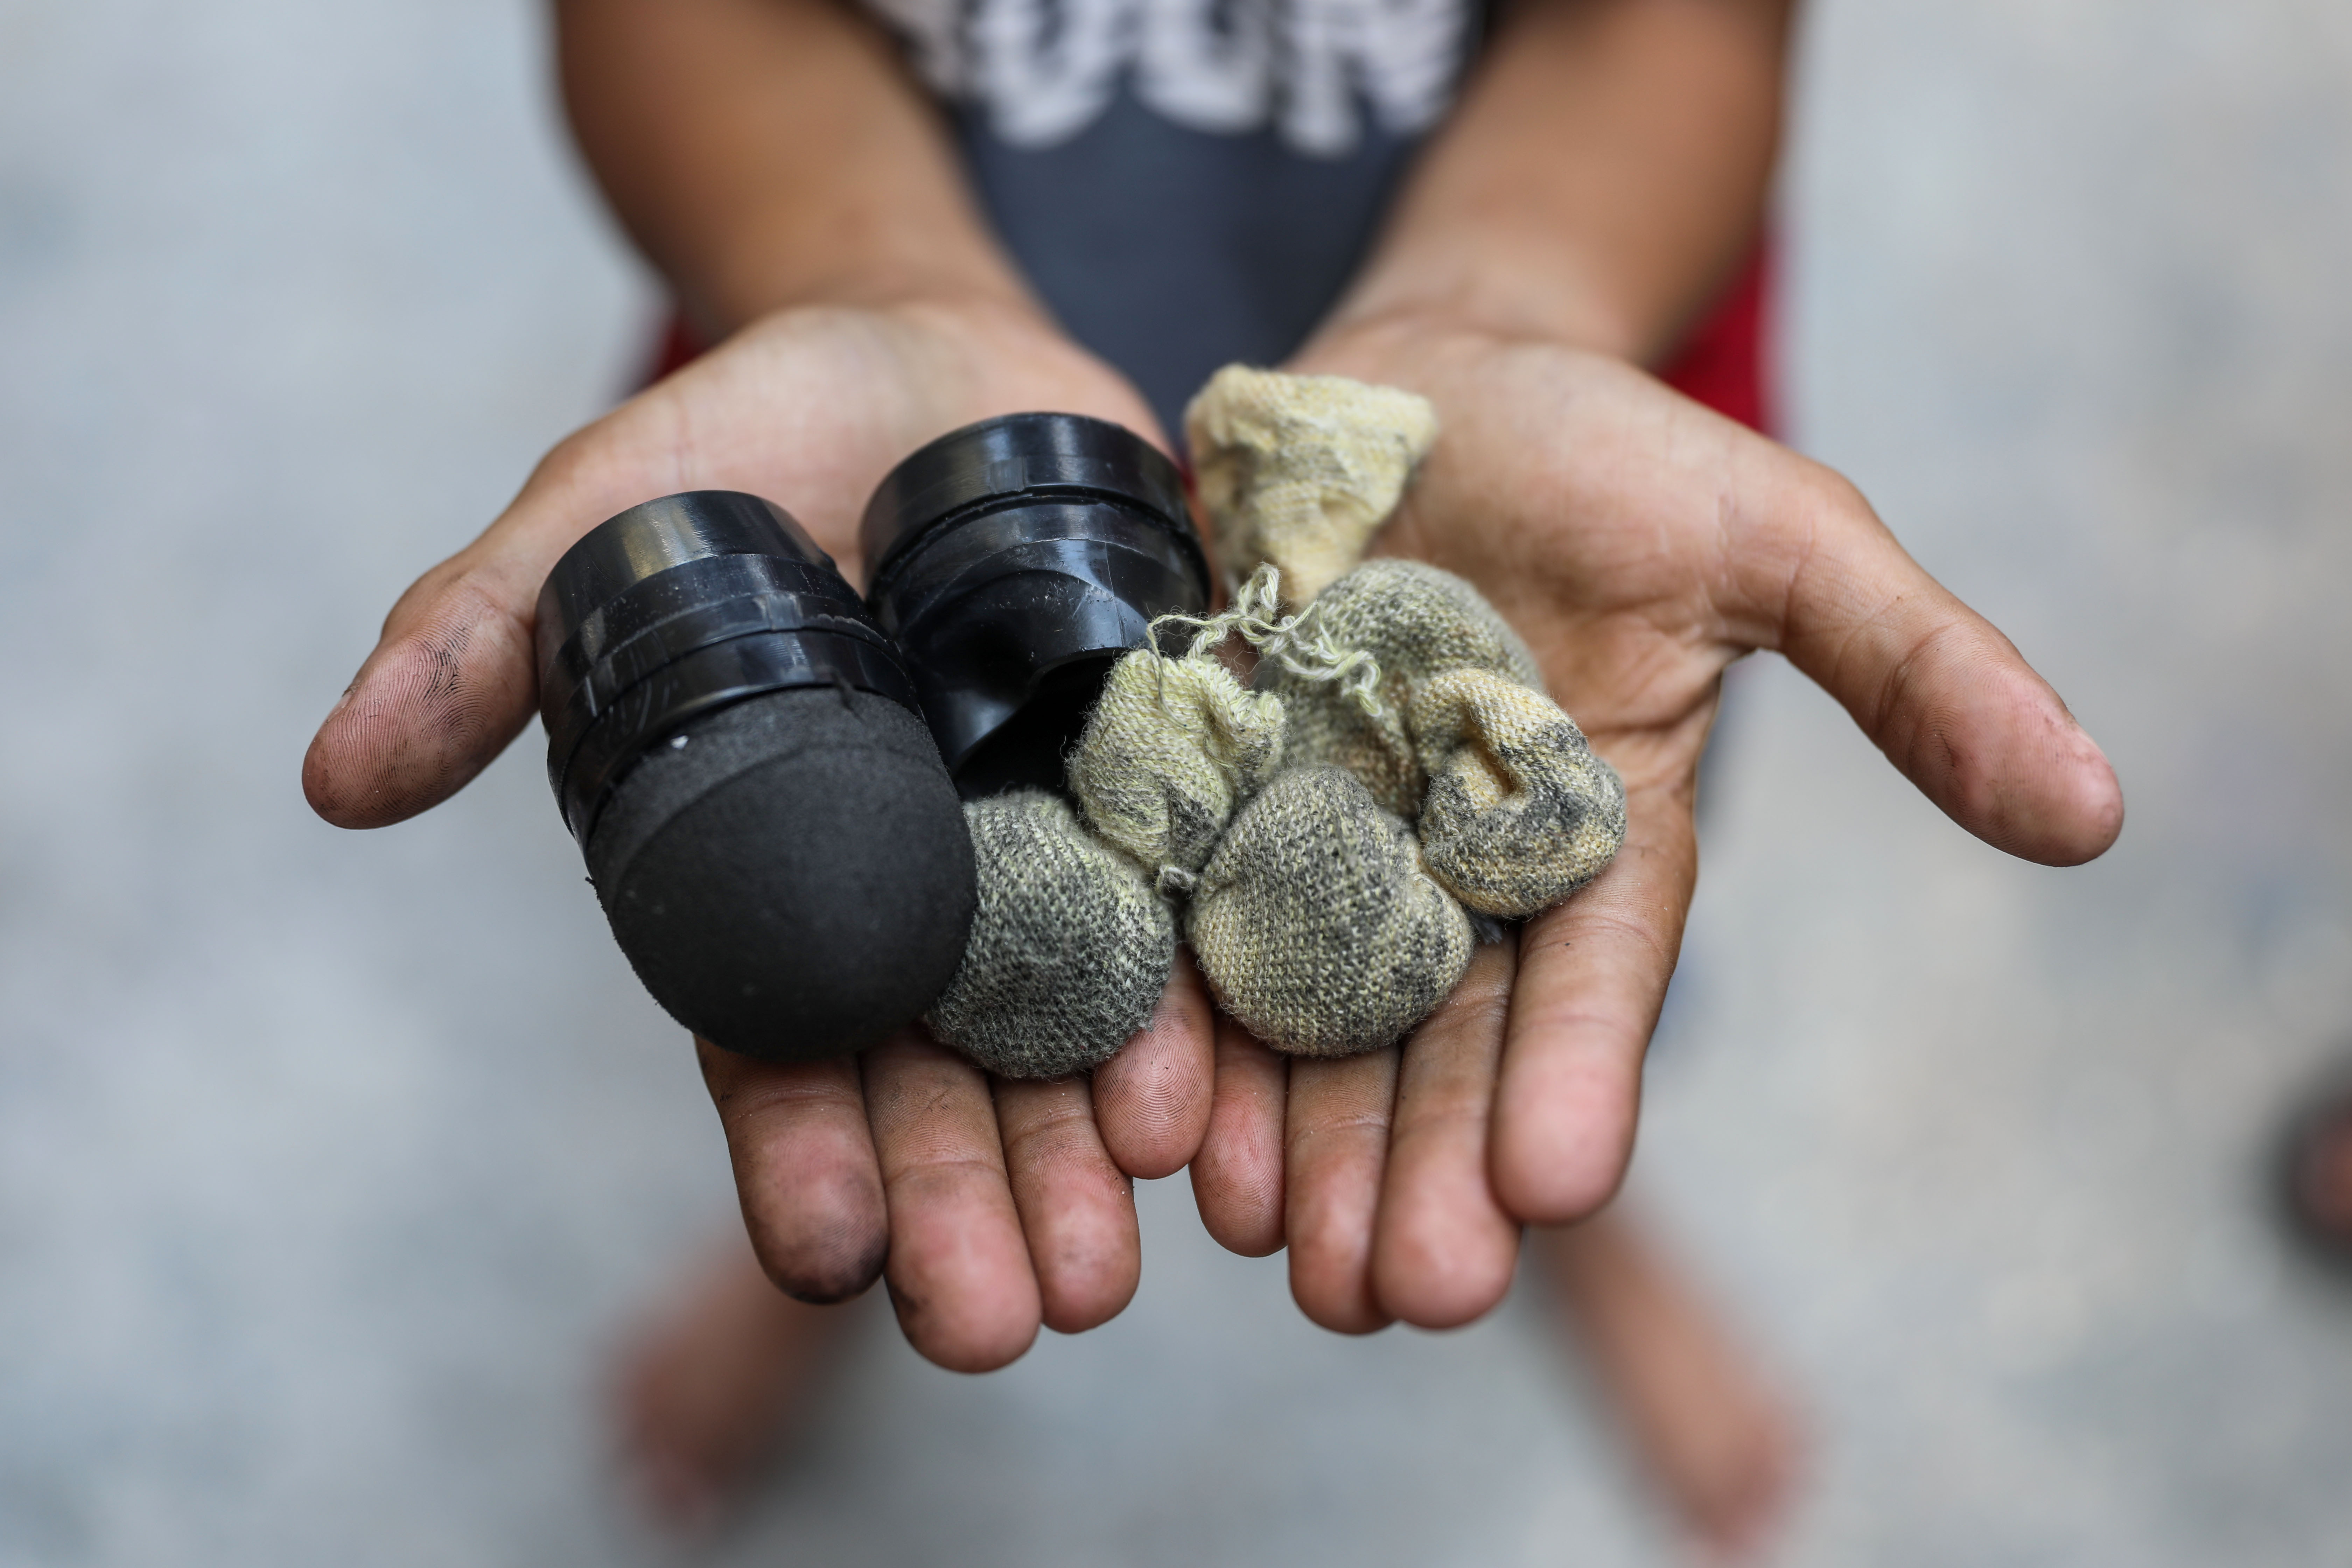 Rubber-coated bullets used by the Israeli navy against fishermen off the coast of Gaza held by a Palestinian child on 16 June 2022. (MEE/Mohammed al-Hajjar)